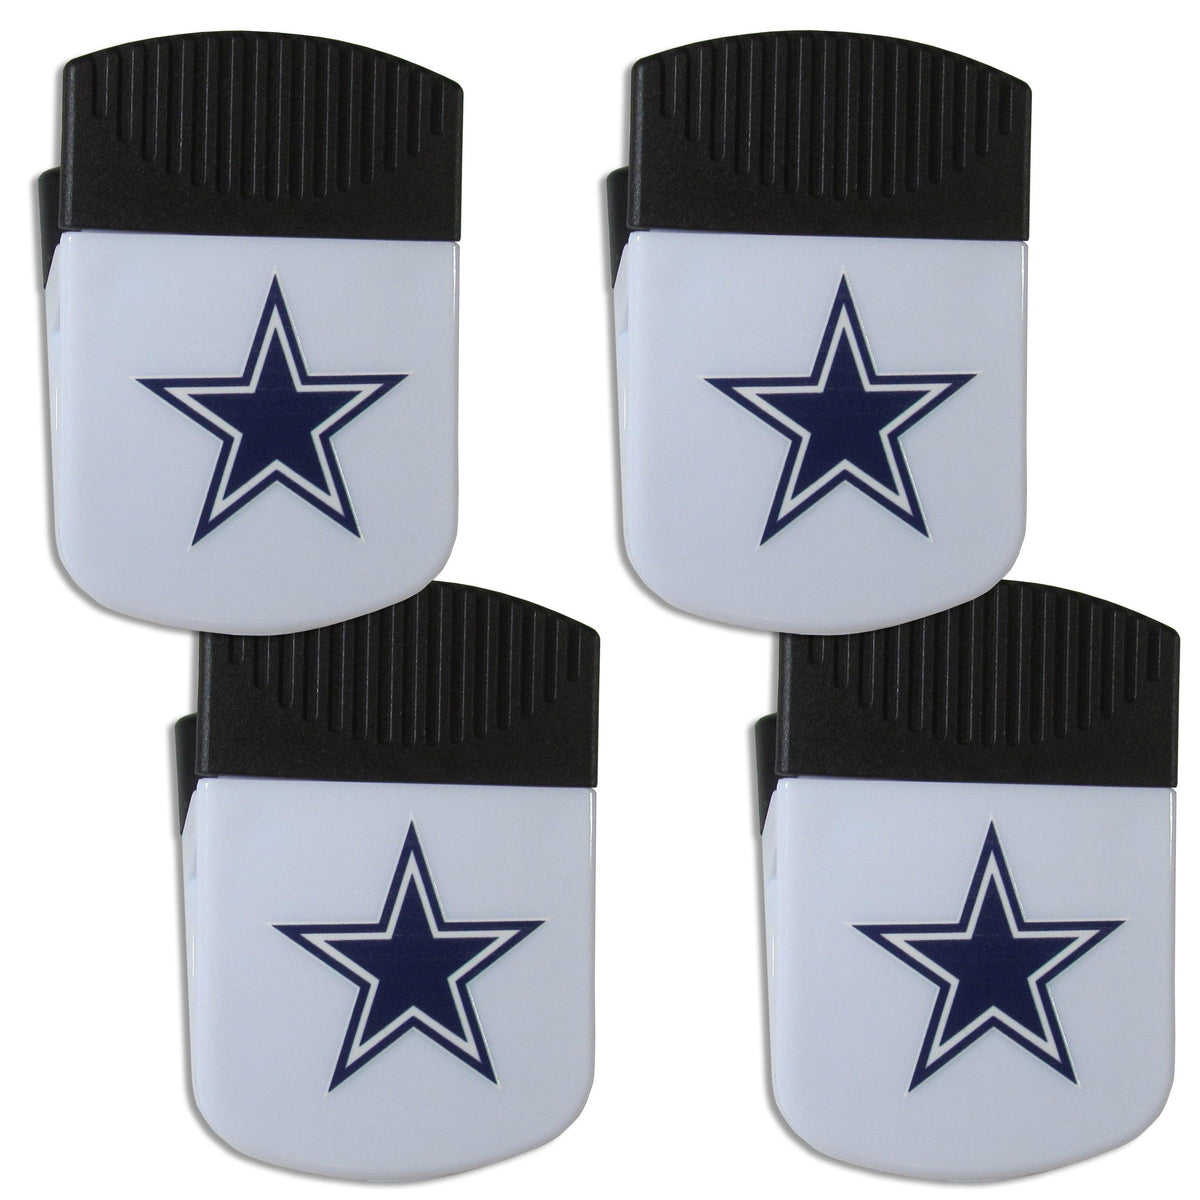 Dallas Cowboys Chip Clip Magnet with Bottle Opener, 4 pack - Flyclothing LLC